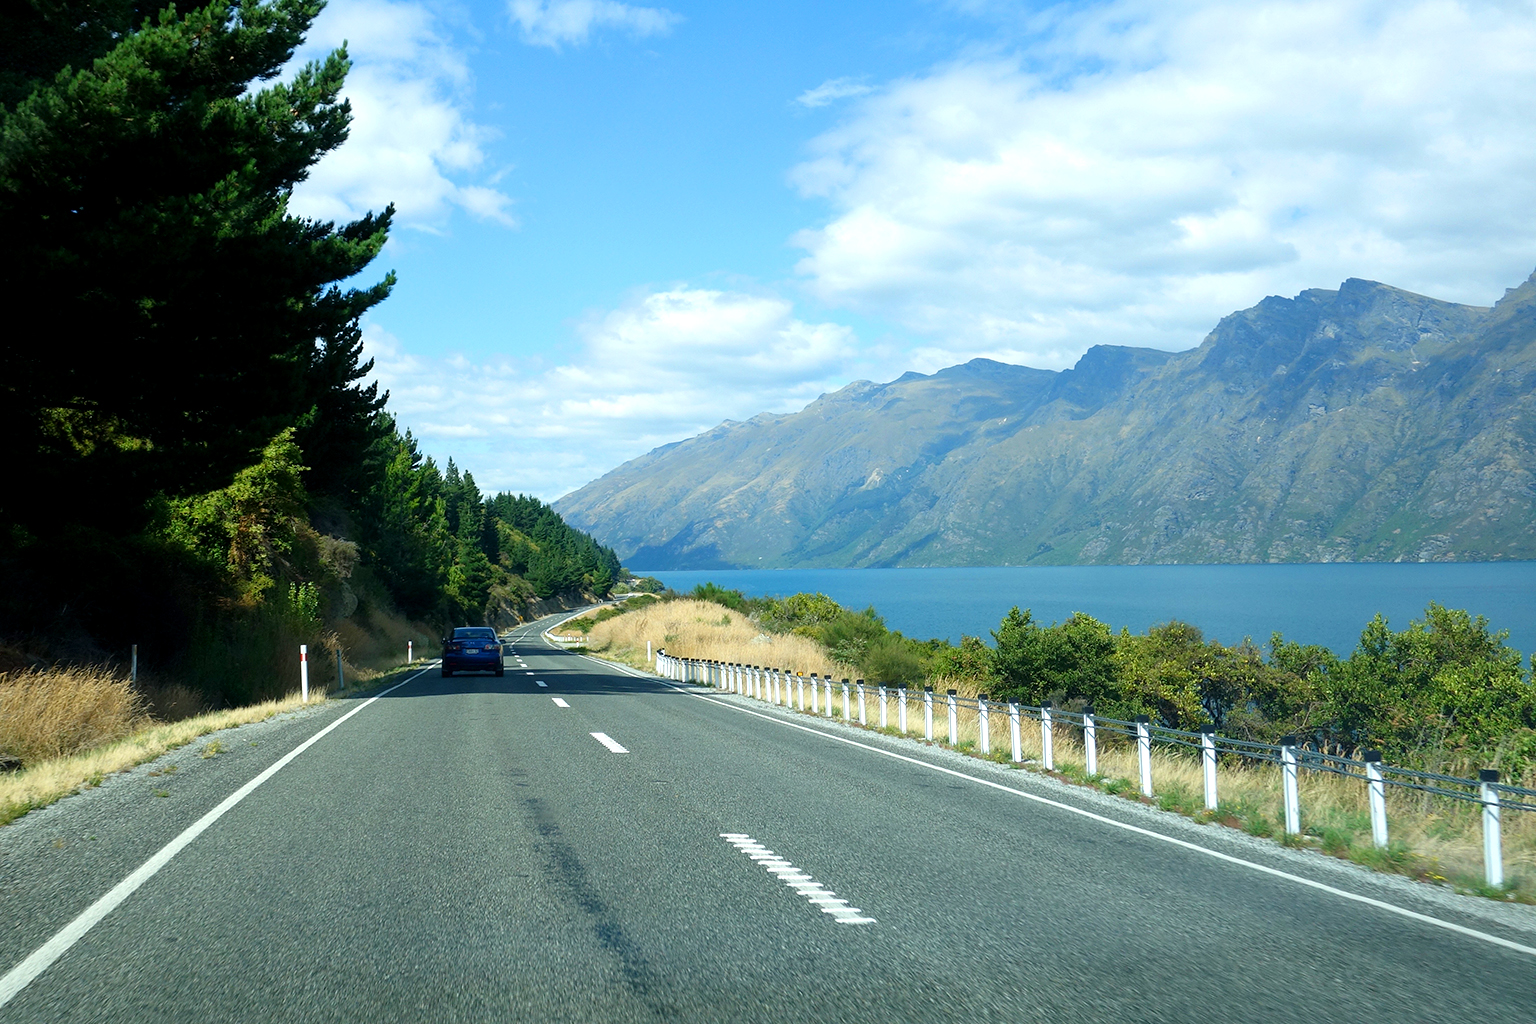 Driving from Queenstown to Invercargill